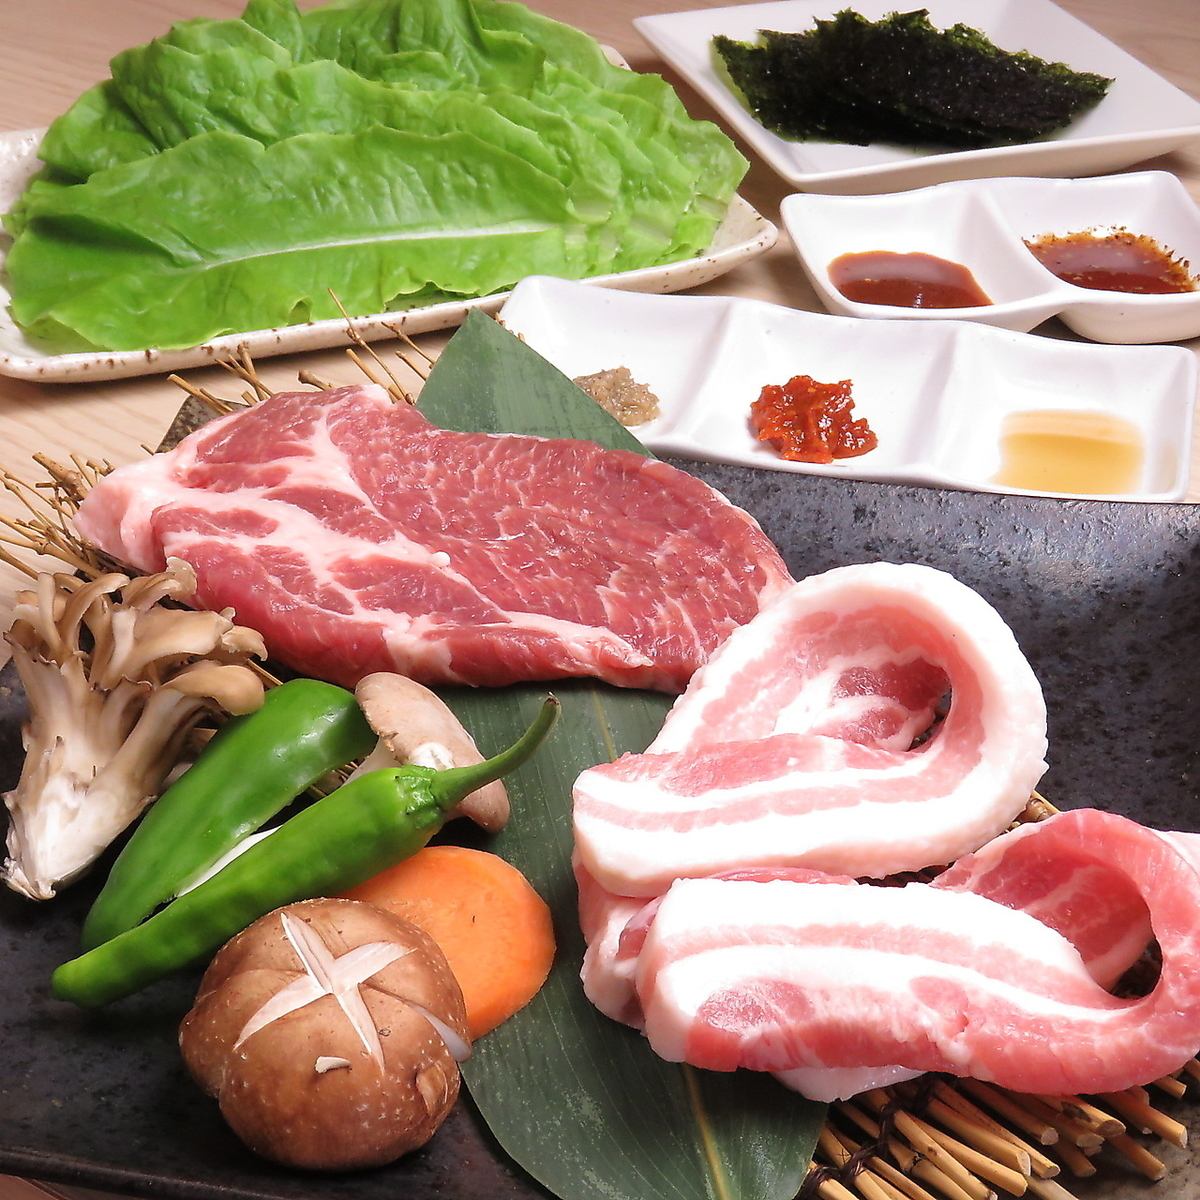 We offer delicious meat such as samgyeopsal and Japanese black beef!